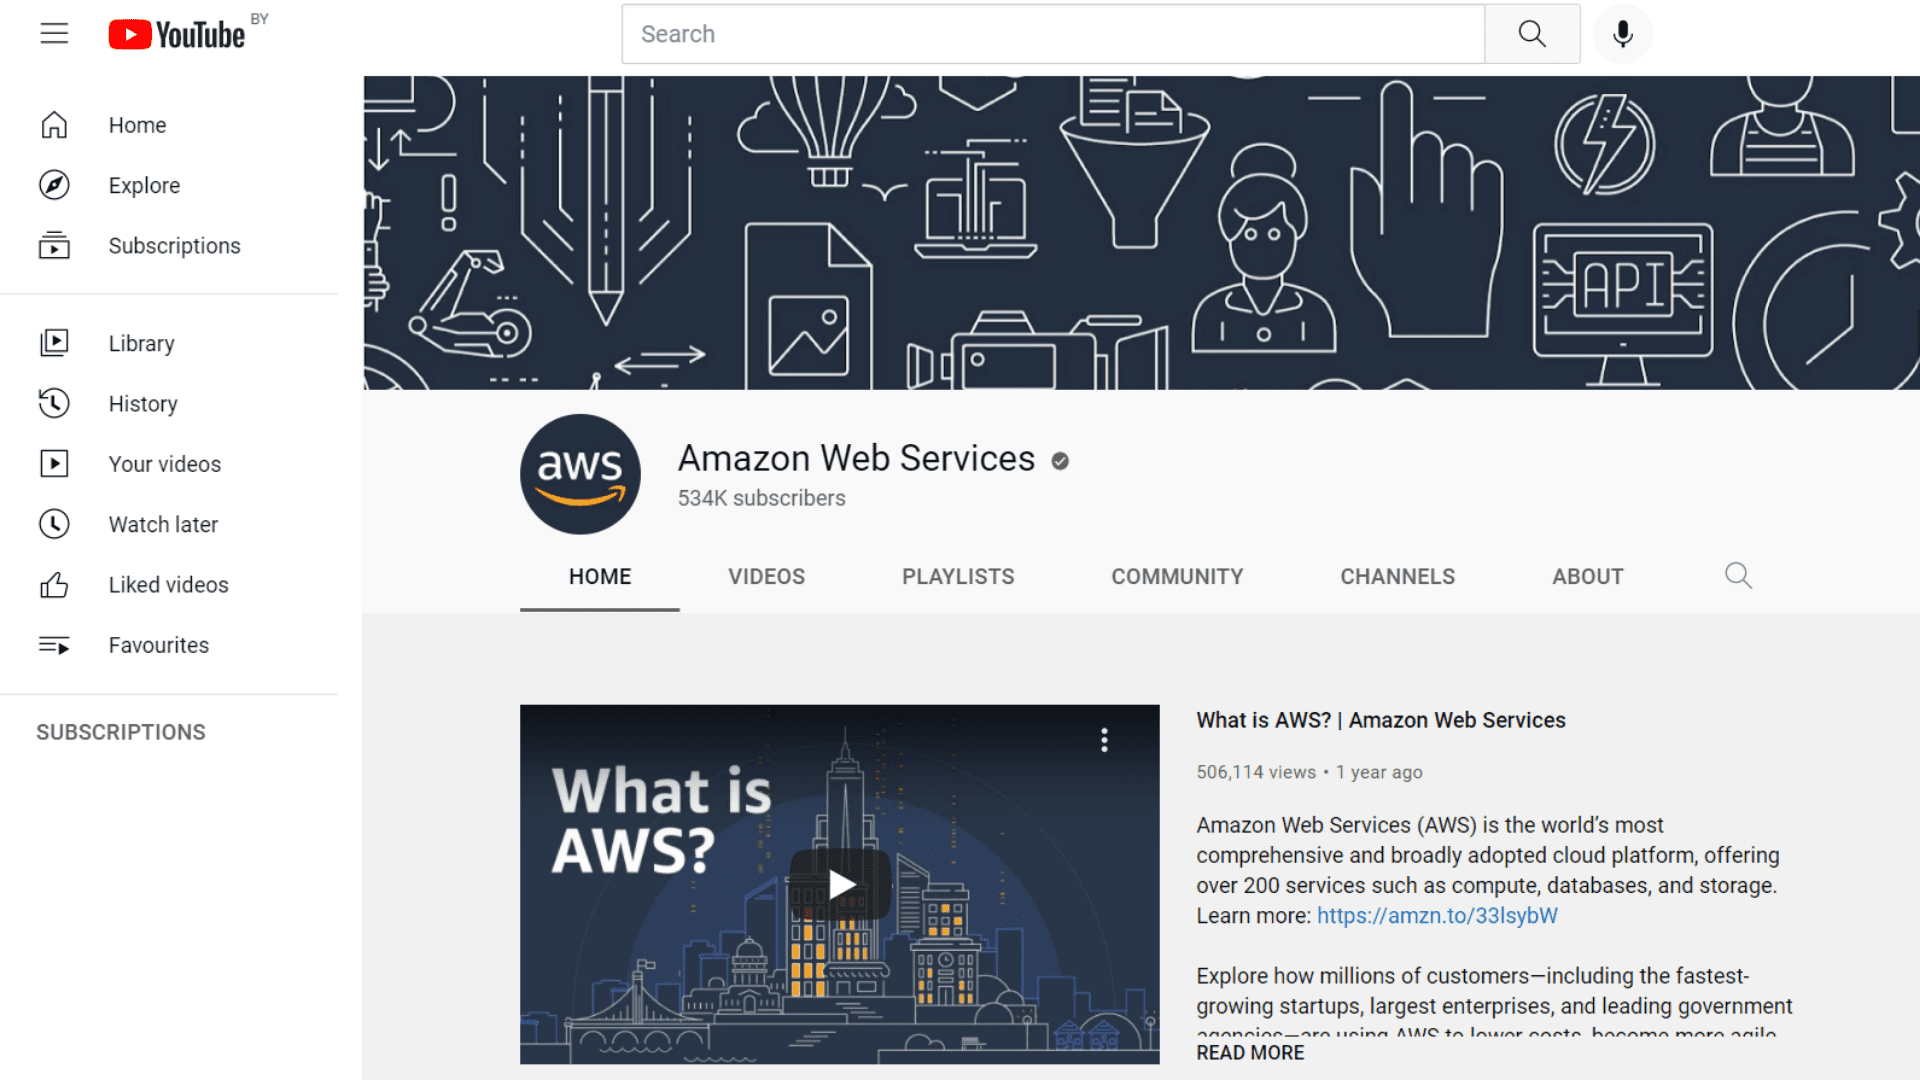 AWS uses a 3 minutes long video to present its capabilities